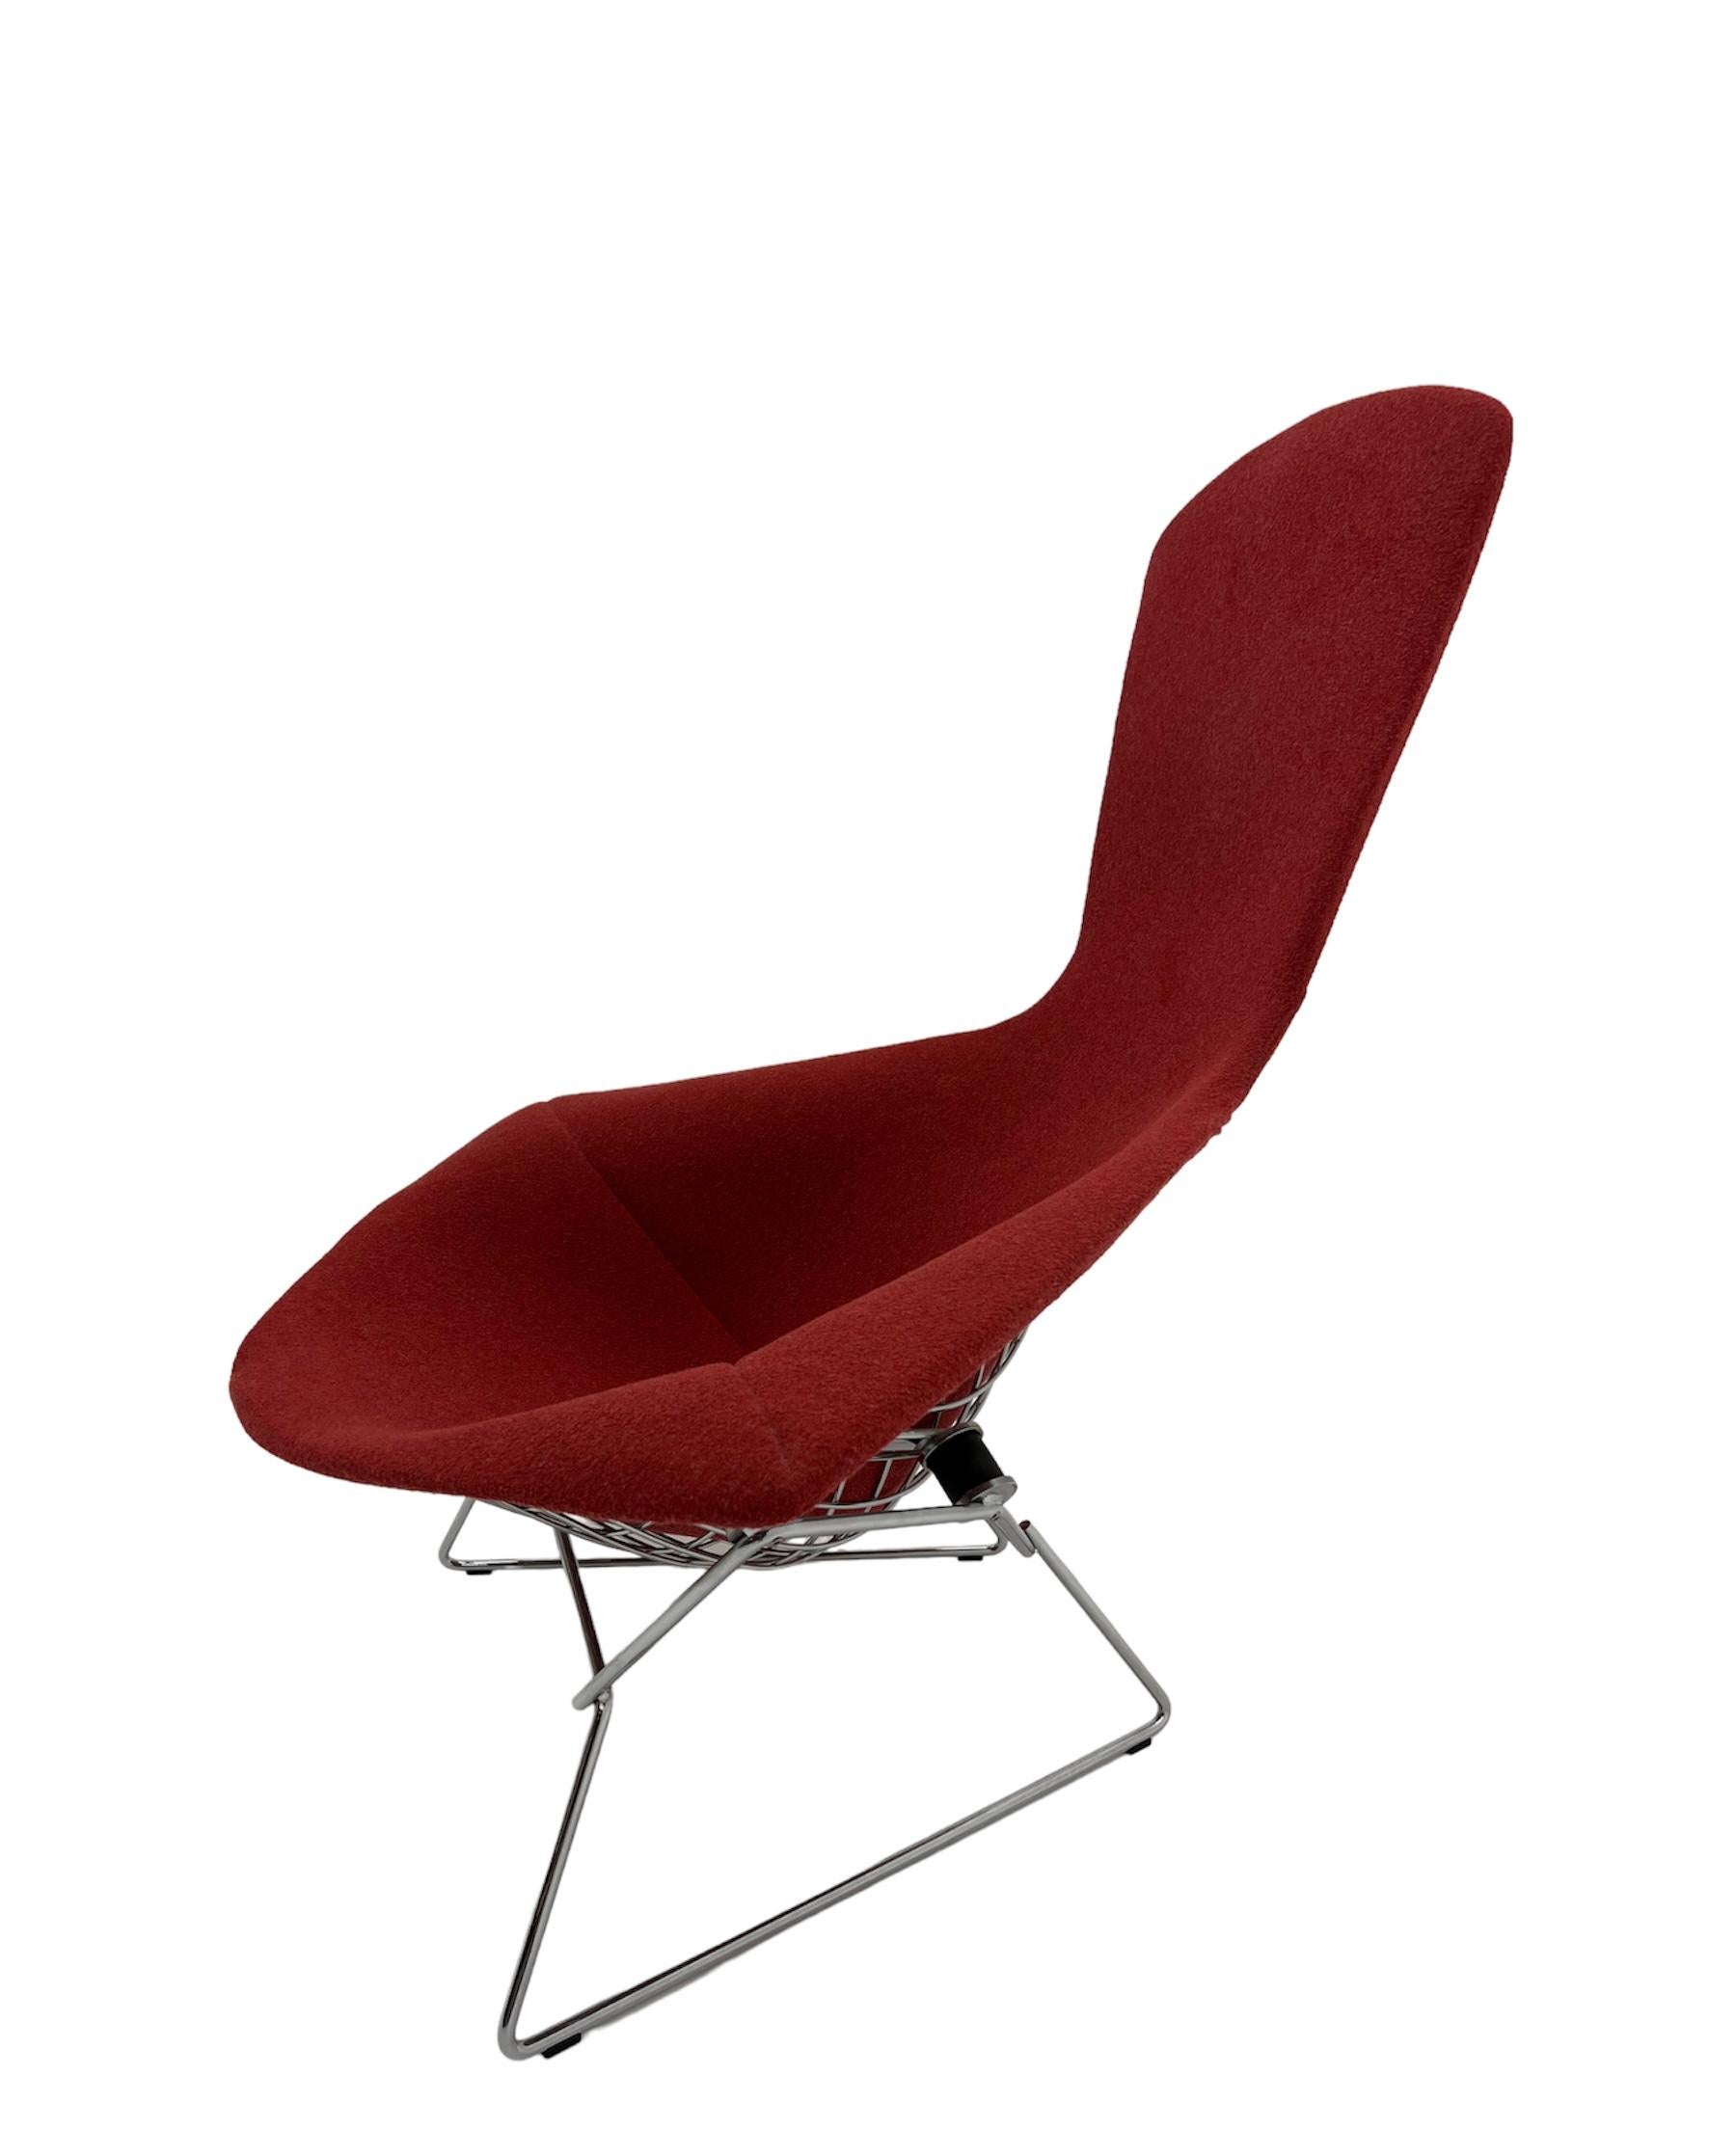 Harry Bertoia for Knoll International bird chair. This iconic lounge chair and ottoman were originally designed by Harry Bertoia in 1952 and manufactured by Knoll International. Each retains the original upholstery. Made of steel, this set was made